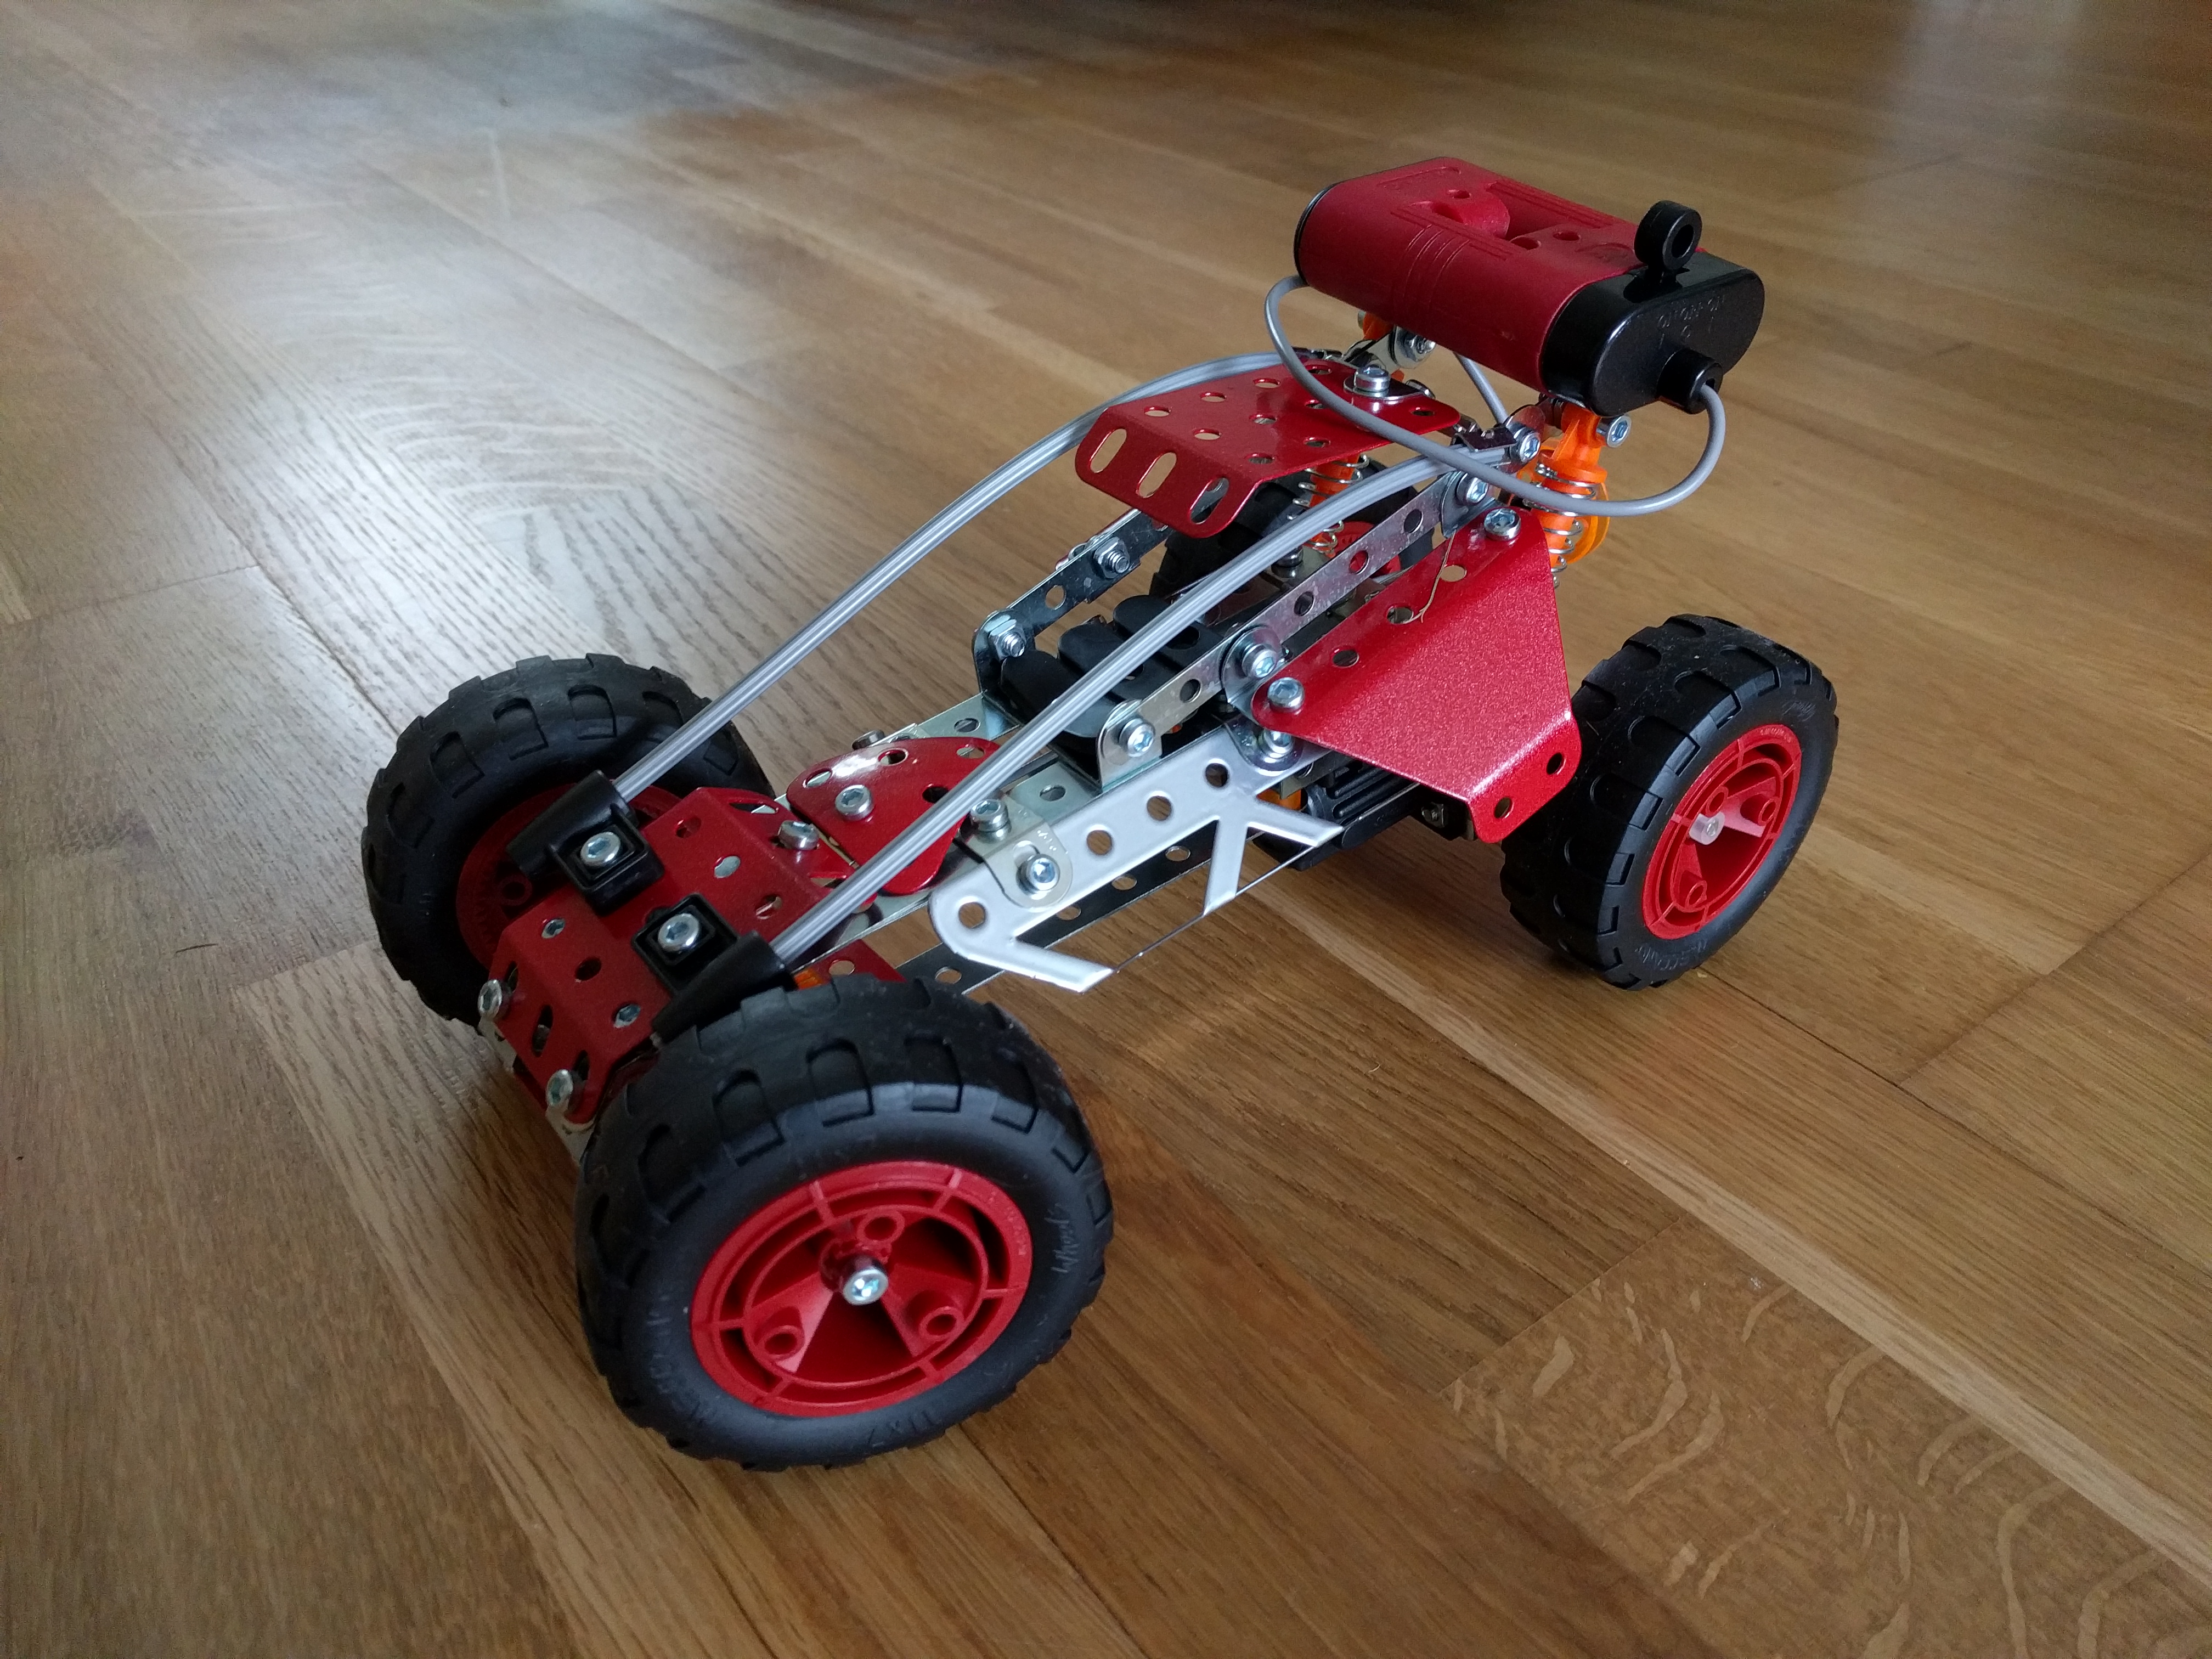 A few days off sick gave me the chance to build the Mecanno electric buggy Tina bought me for Christmas. I feel the need to lash it up to an Arduino. :)